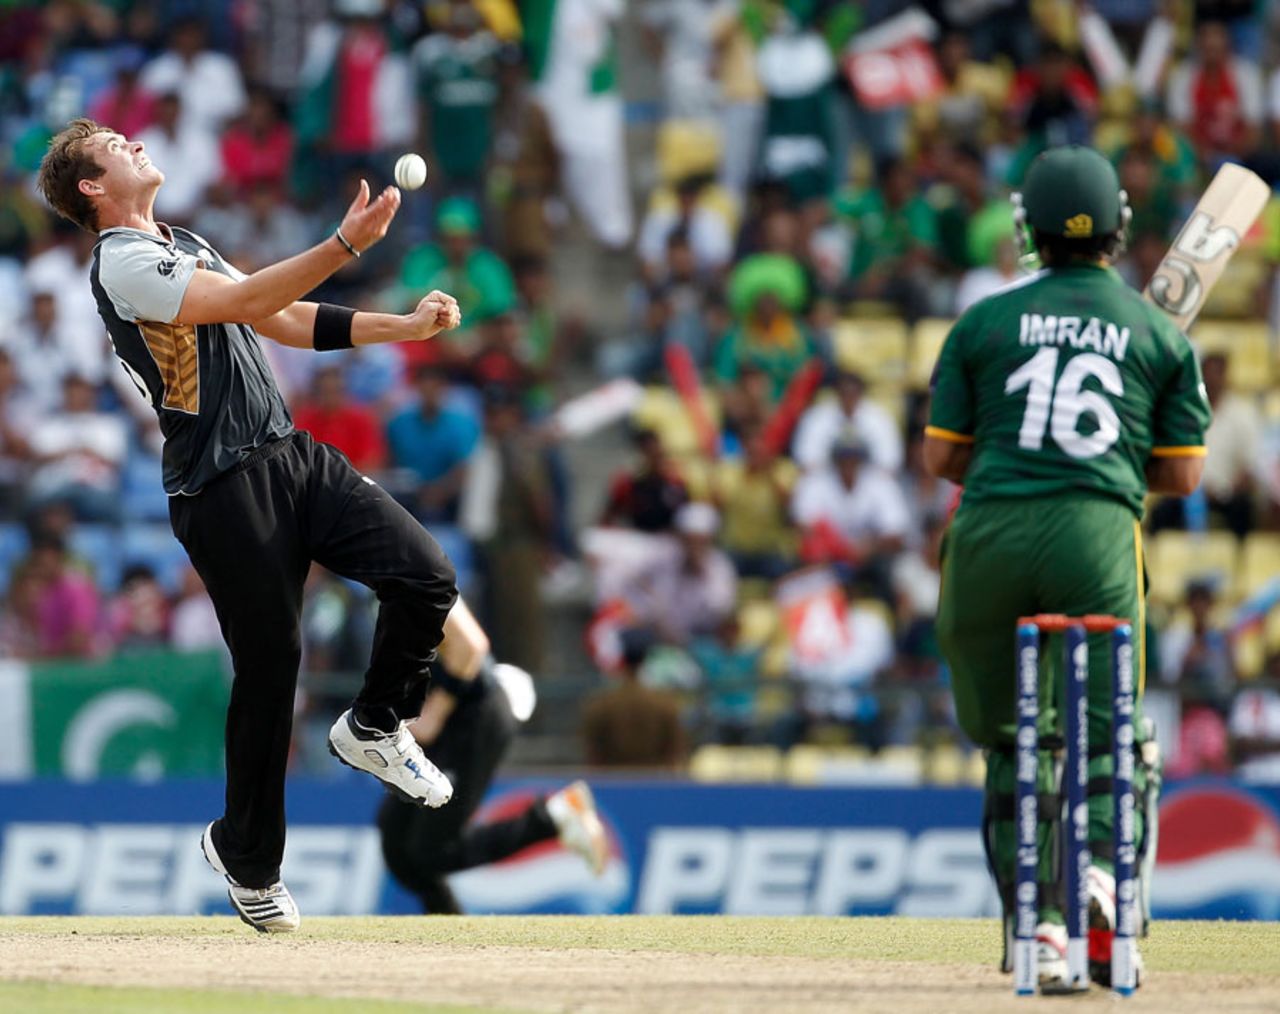 Tim Southee claims a caught and bowled chance from Imran Nazir, New Zealand v Pakistan, World T20 2012, Group D, Pallekele, September, 23, 2012